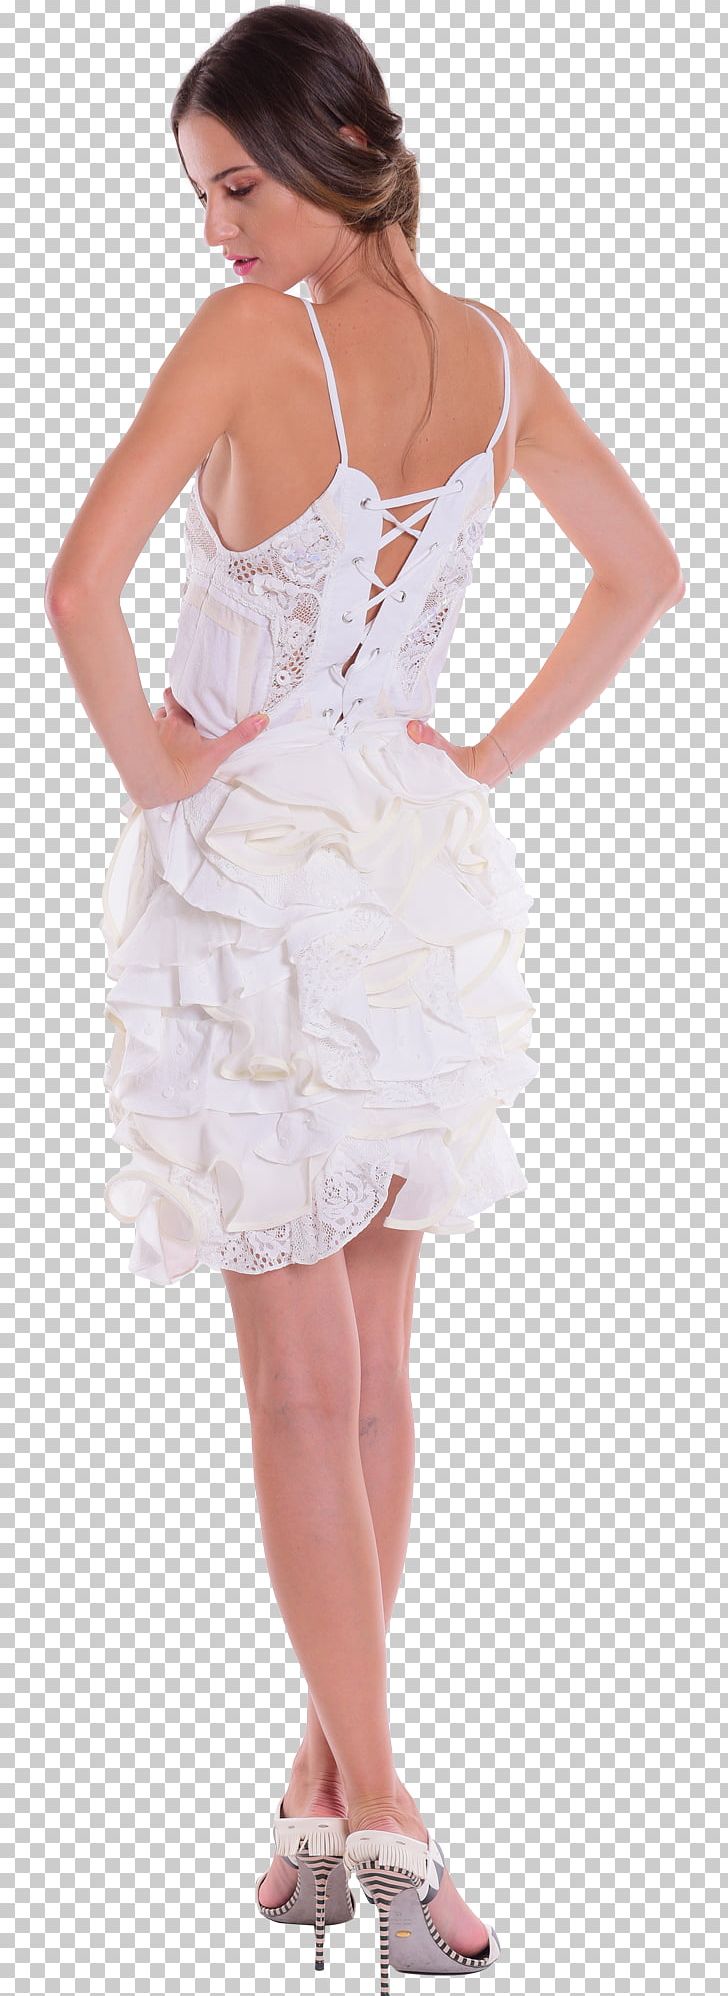 Chelsea White Wedding Dress Clothing Cocktail Dress PNG, Clipart, Bridal Clothing, Bridal Party Dress, Chelsea White, Clothing, Cocktail Dress Free PNG Download